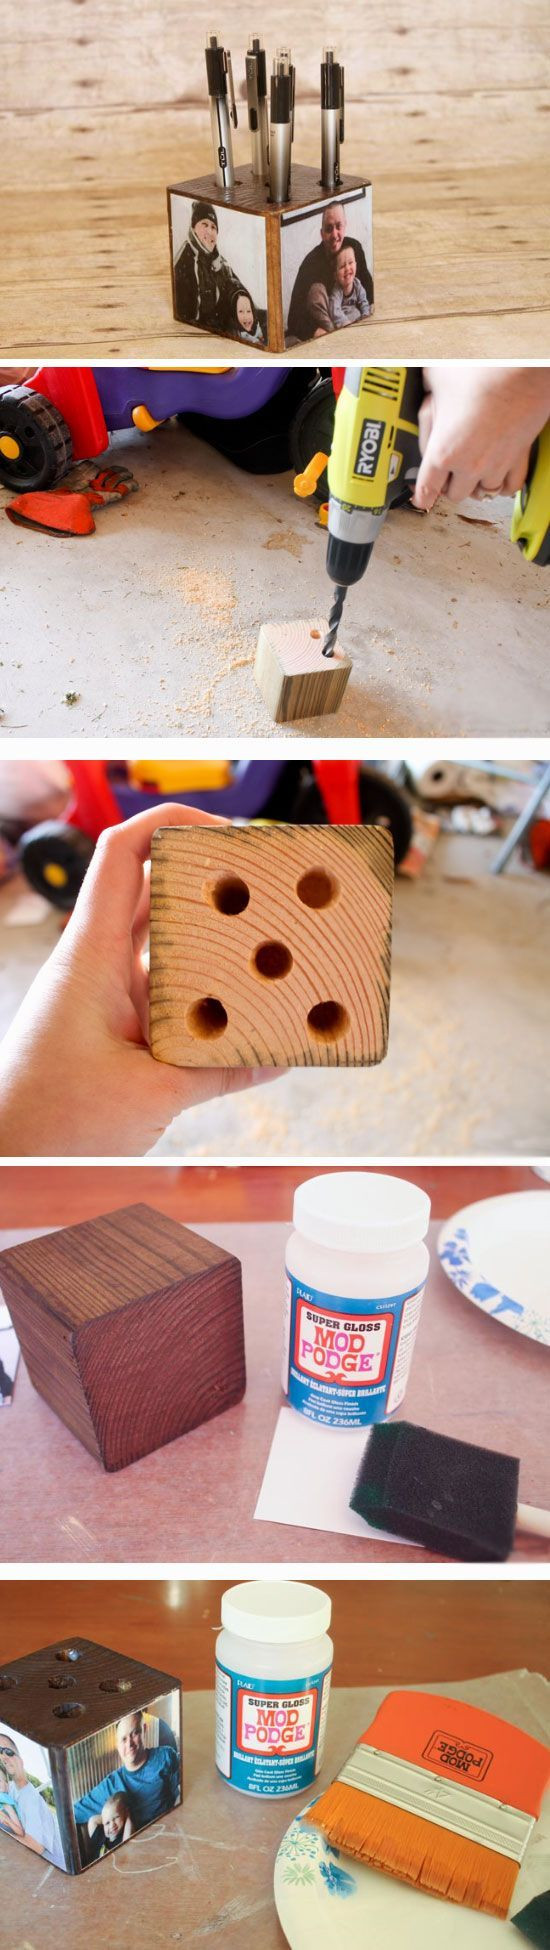 DIY Christmas Presents For Dad
 Best 25 Gifts For Dad ideas on Pinterest